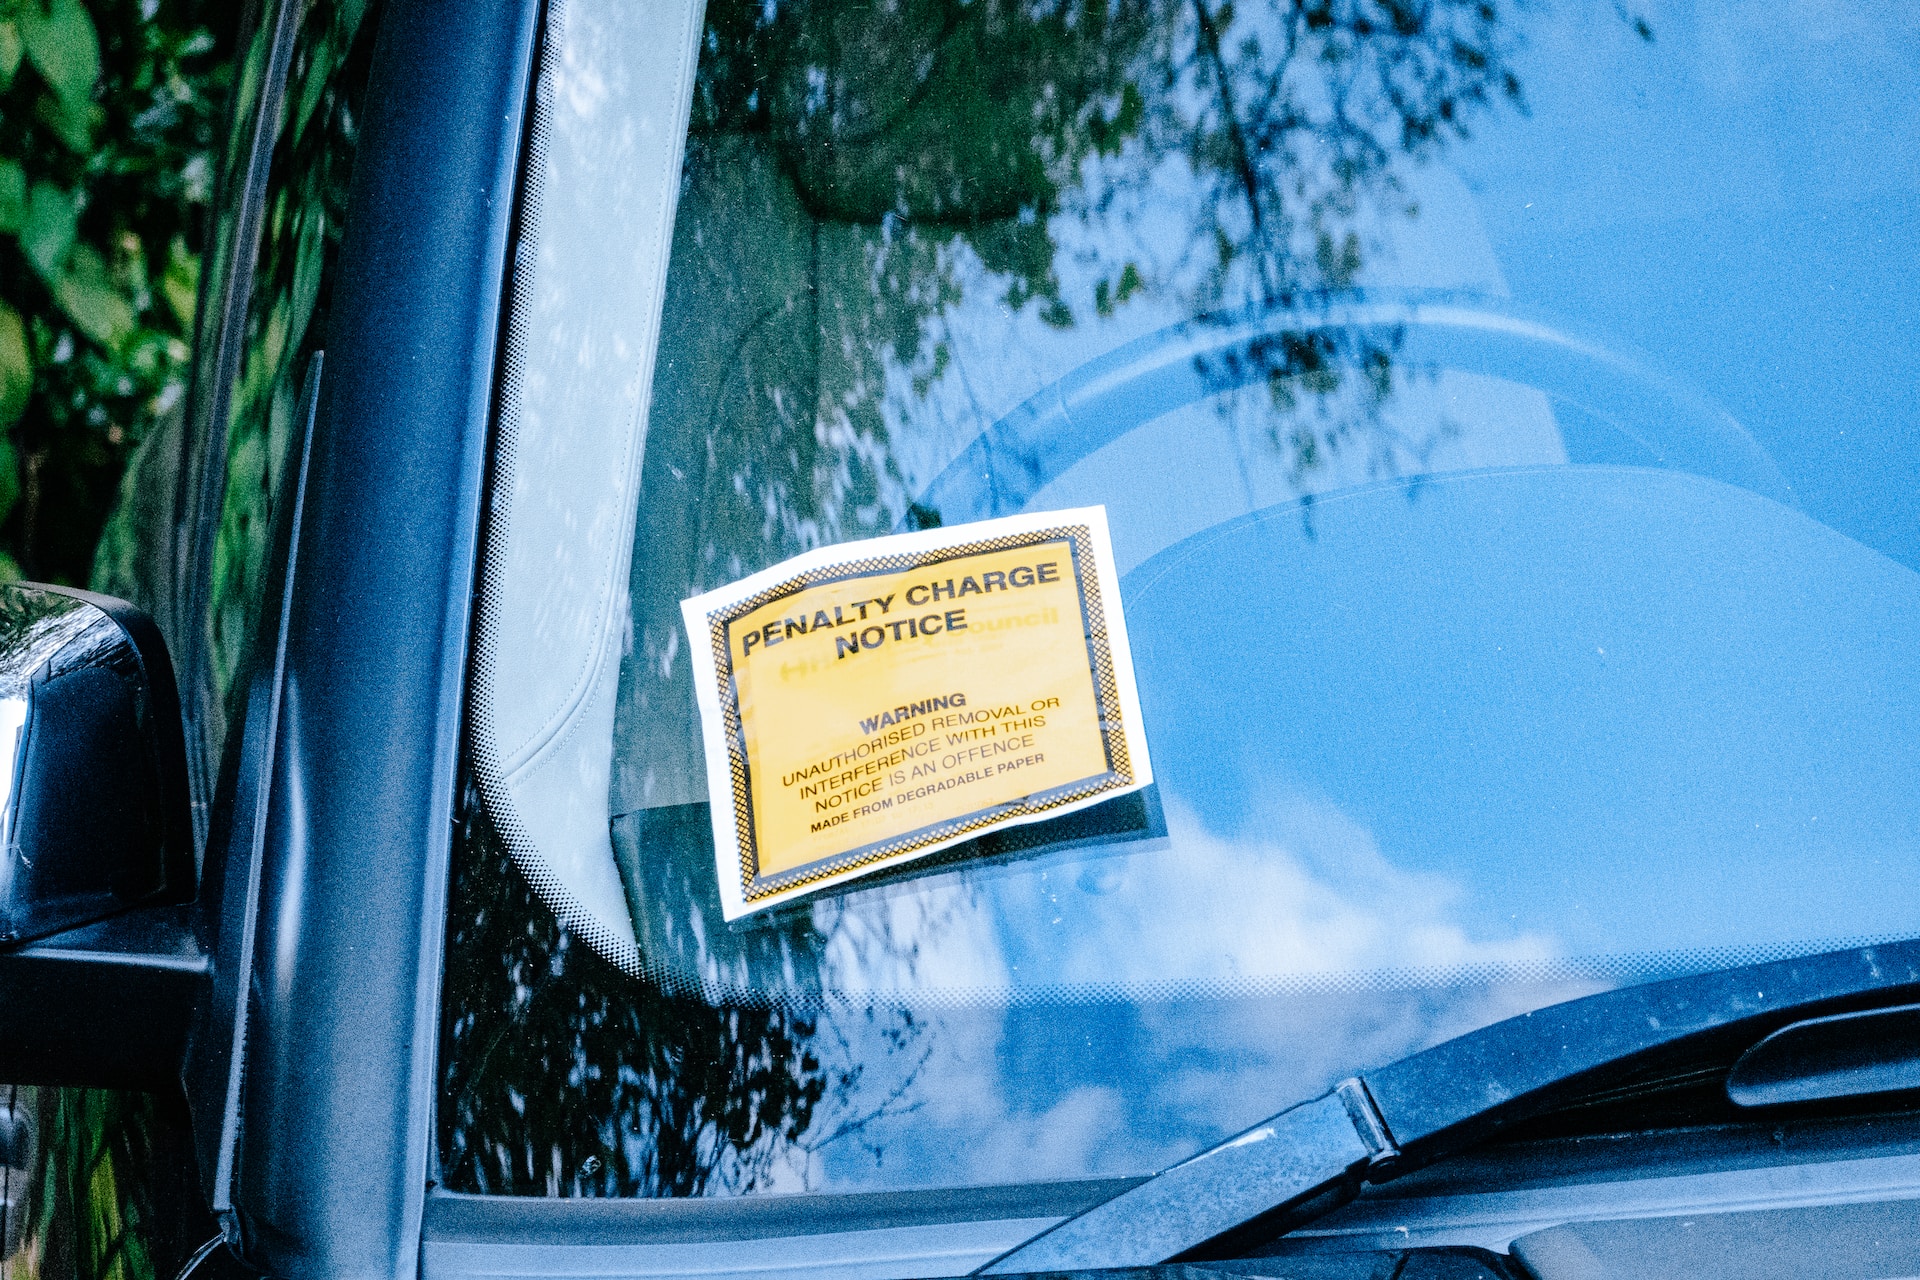 A penalty charge (parking fine) left on a car windshield